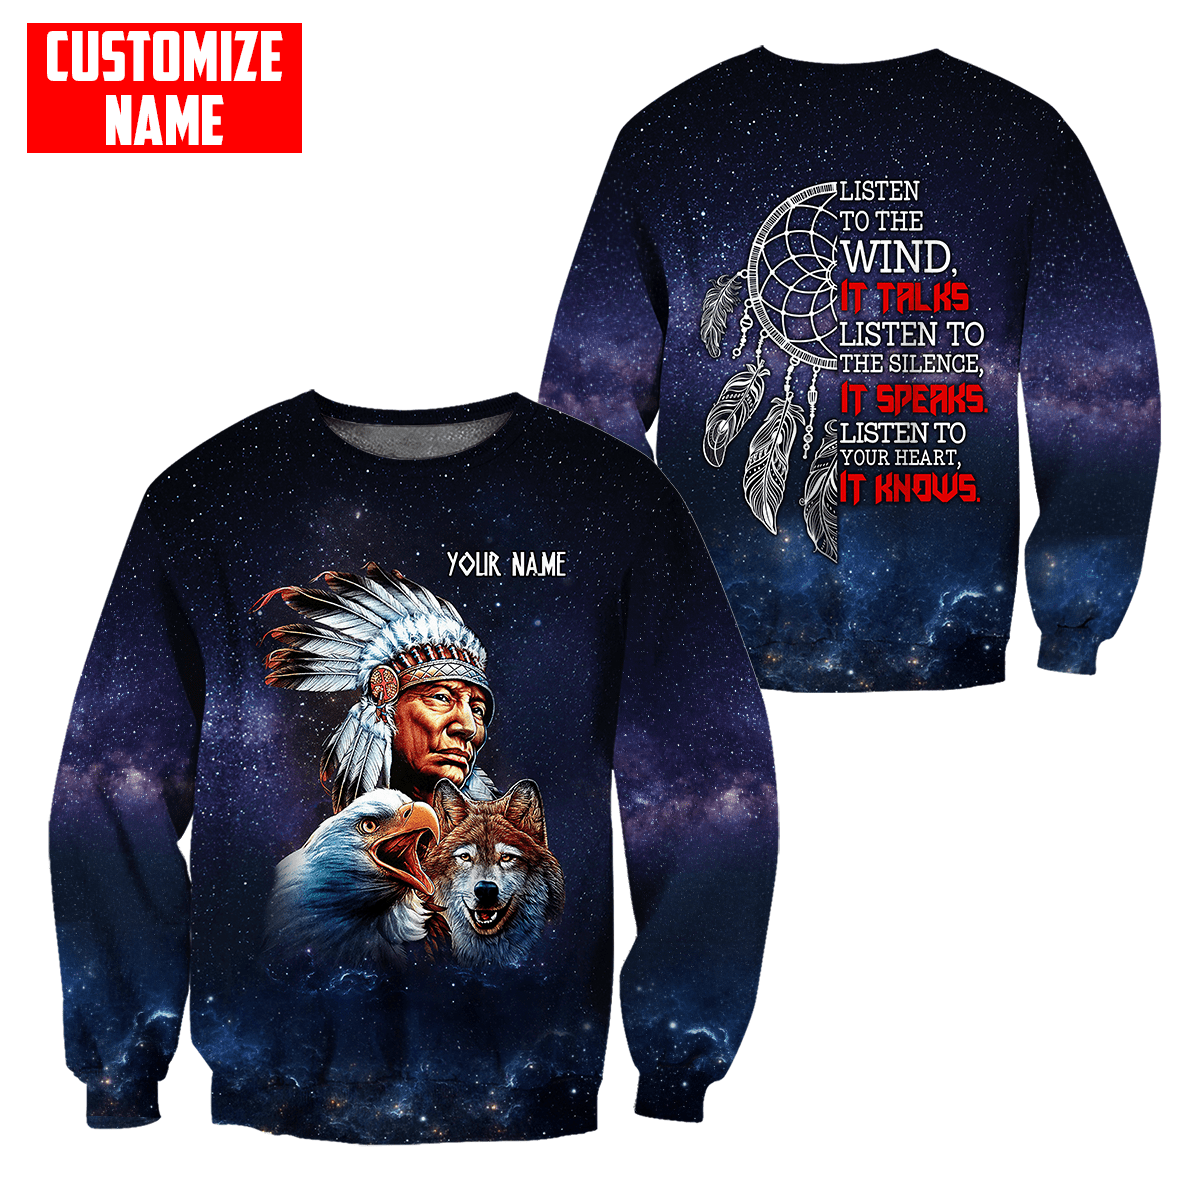 customized-name-native-american-3d-all-over-printed-sweatshirt